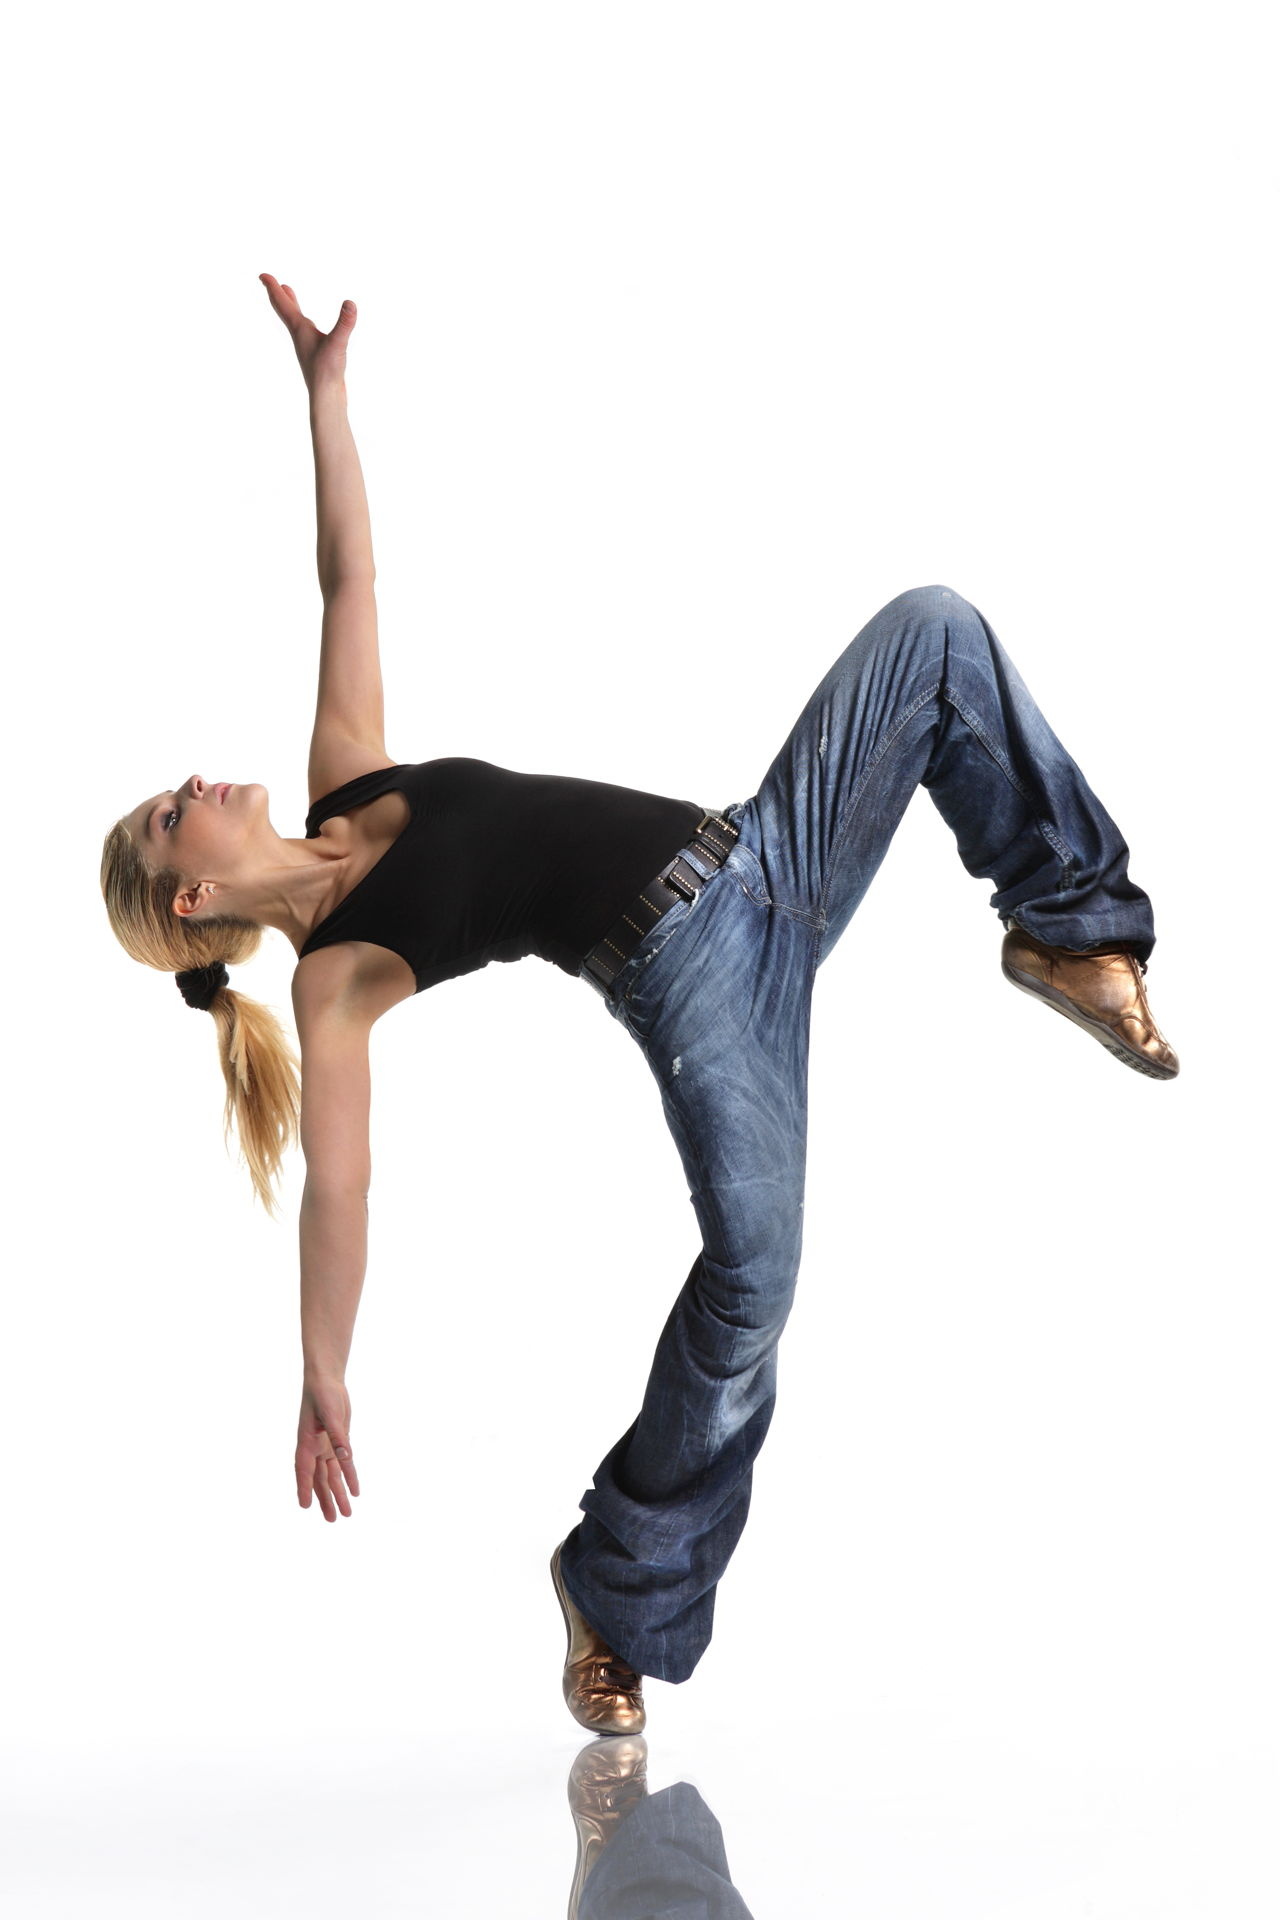 Popping Dance: Hip-Hop dancers, The dance that originated in Fresno California in the 1970s. 1280x1920 HD Background.